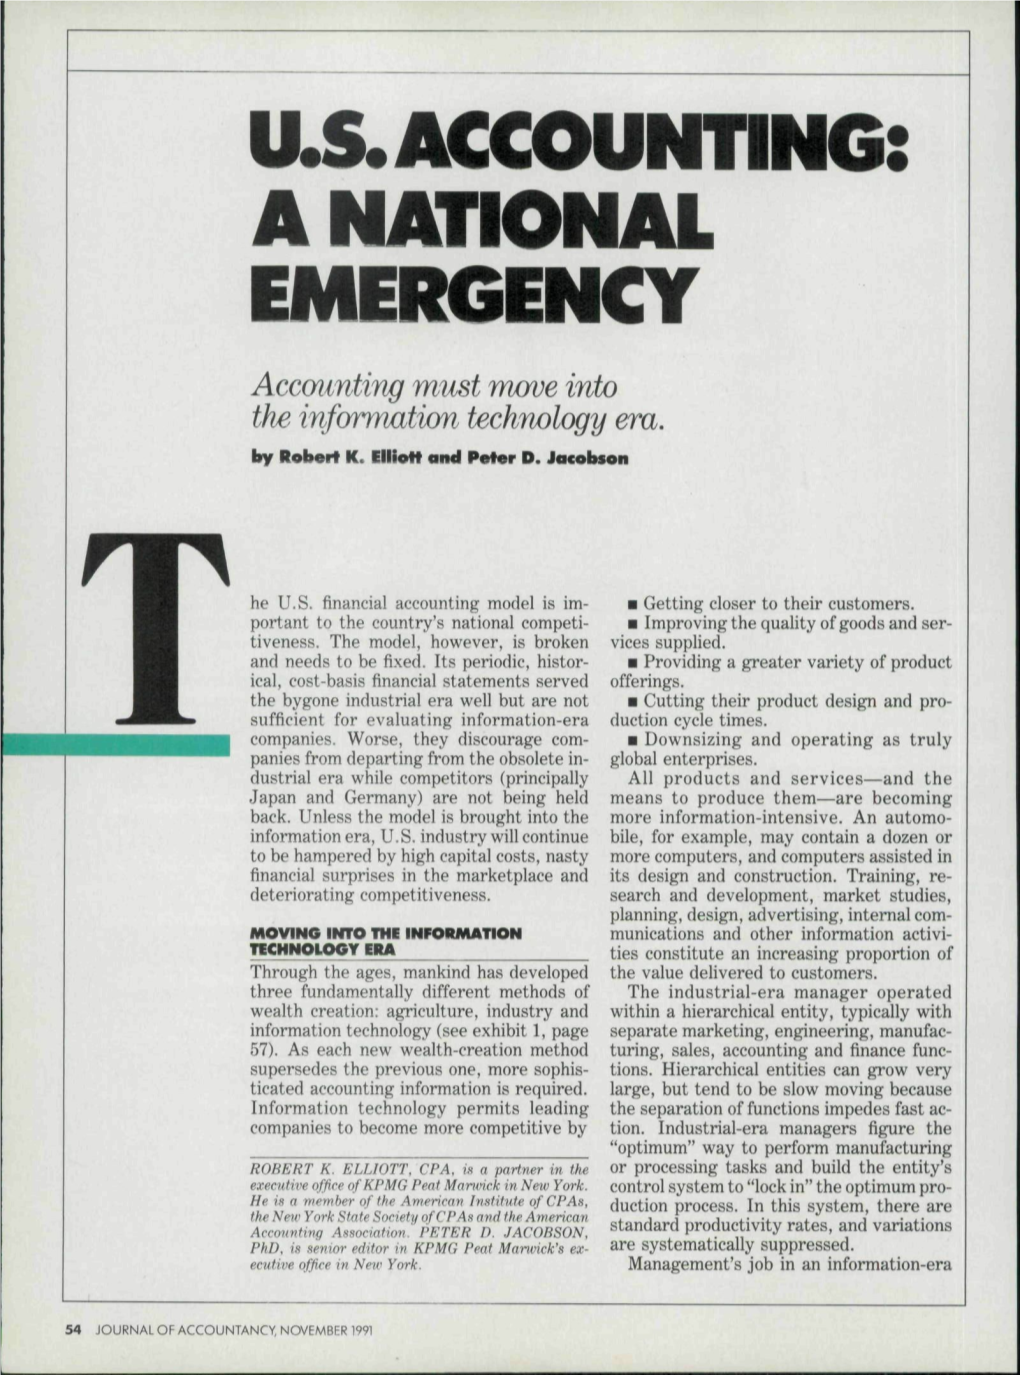 ACCOUNTING a NATIONAL EMERGENCY Accmmting Must Move Into the Information Technology Era, by Roberi K